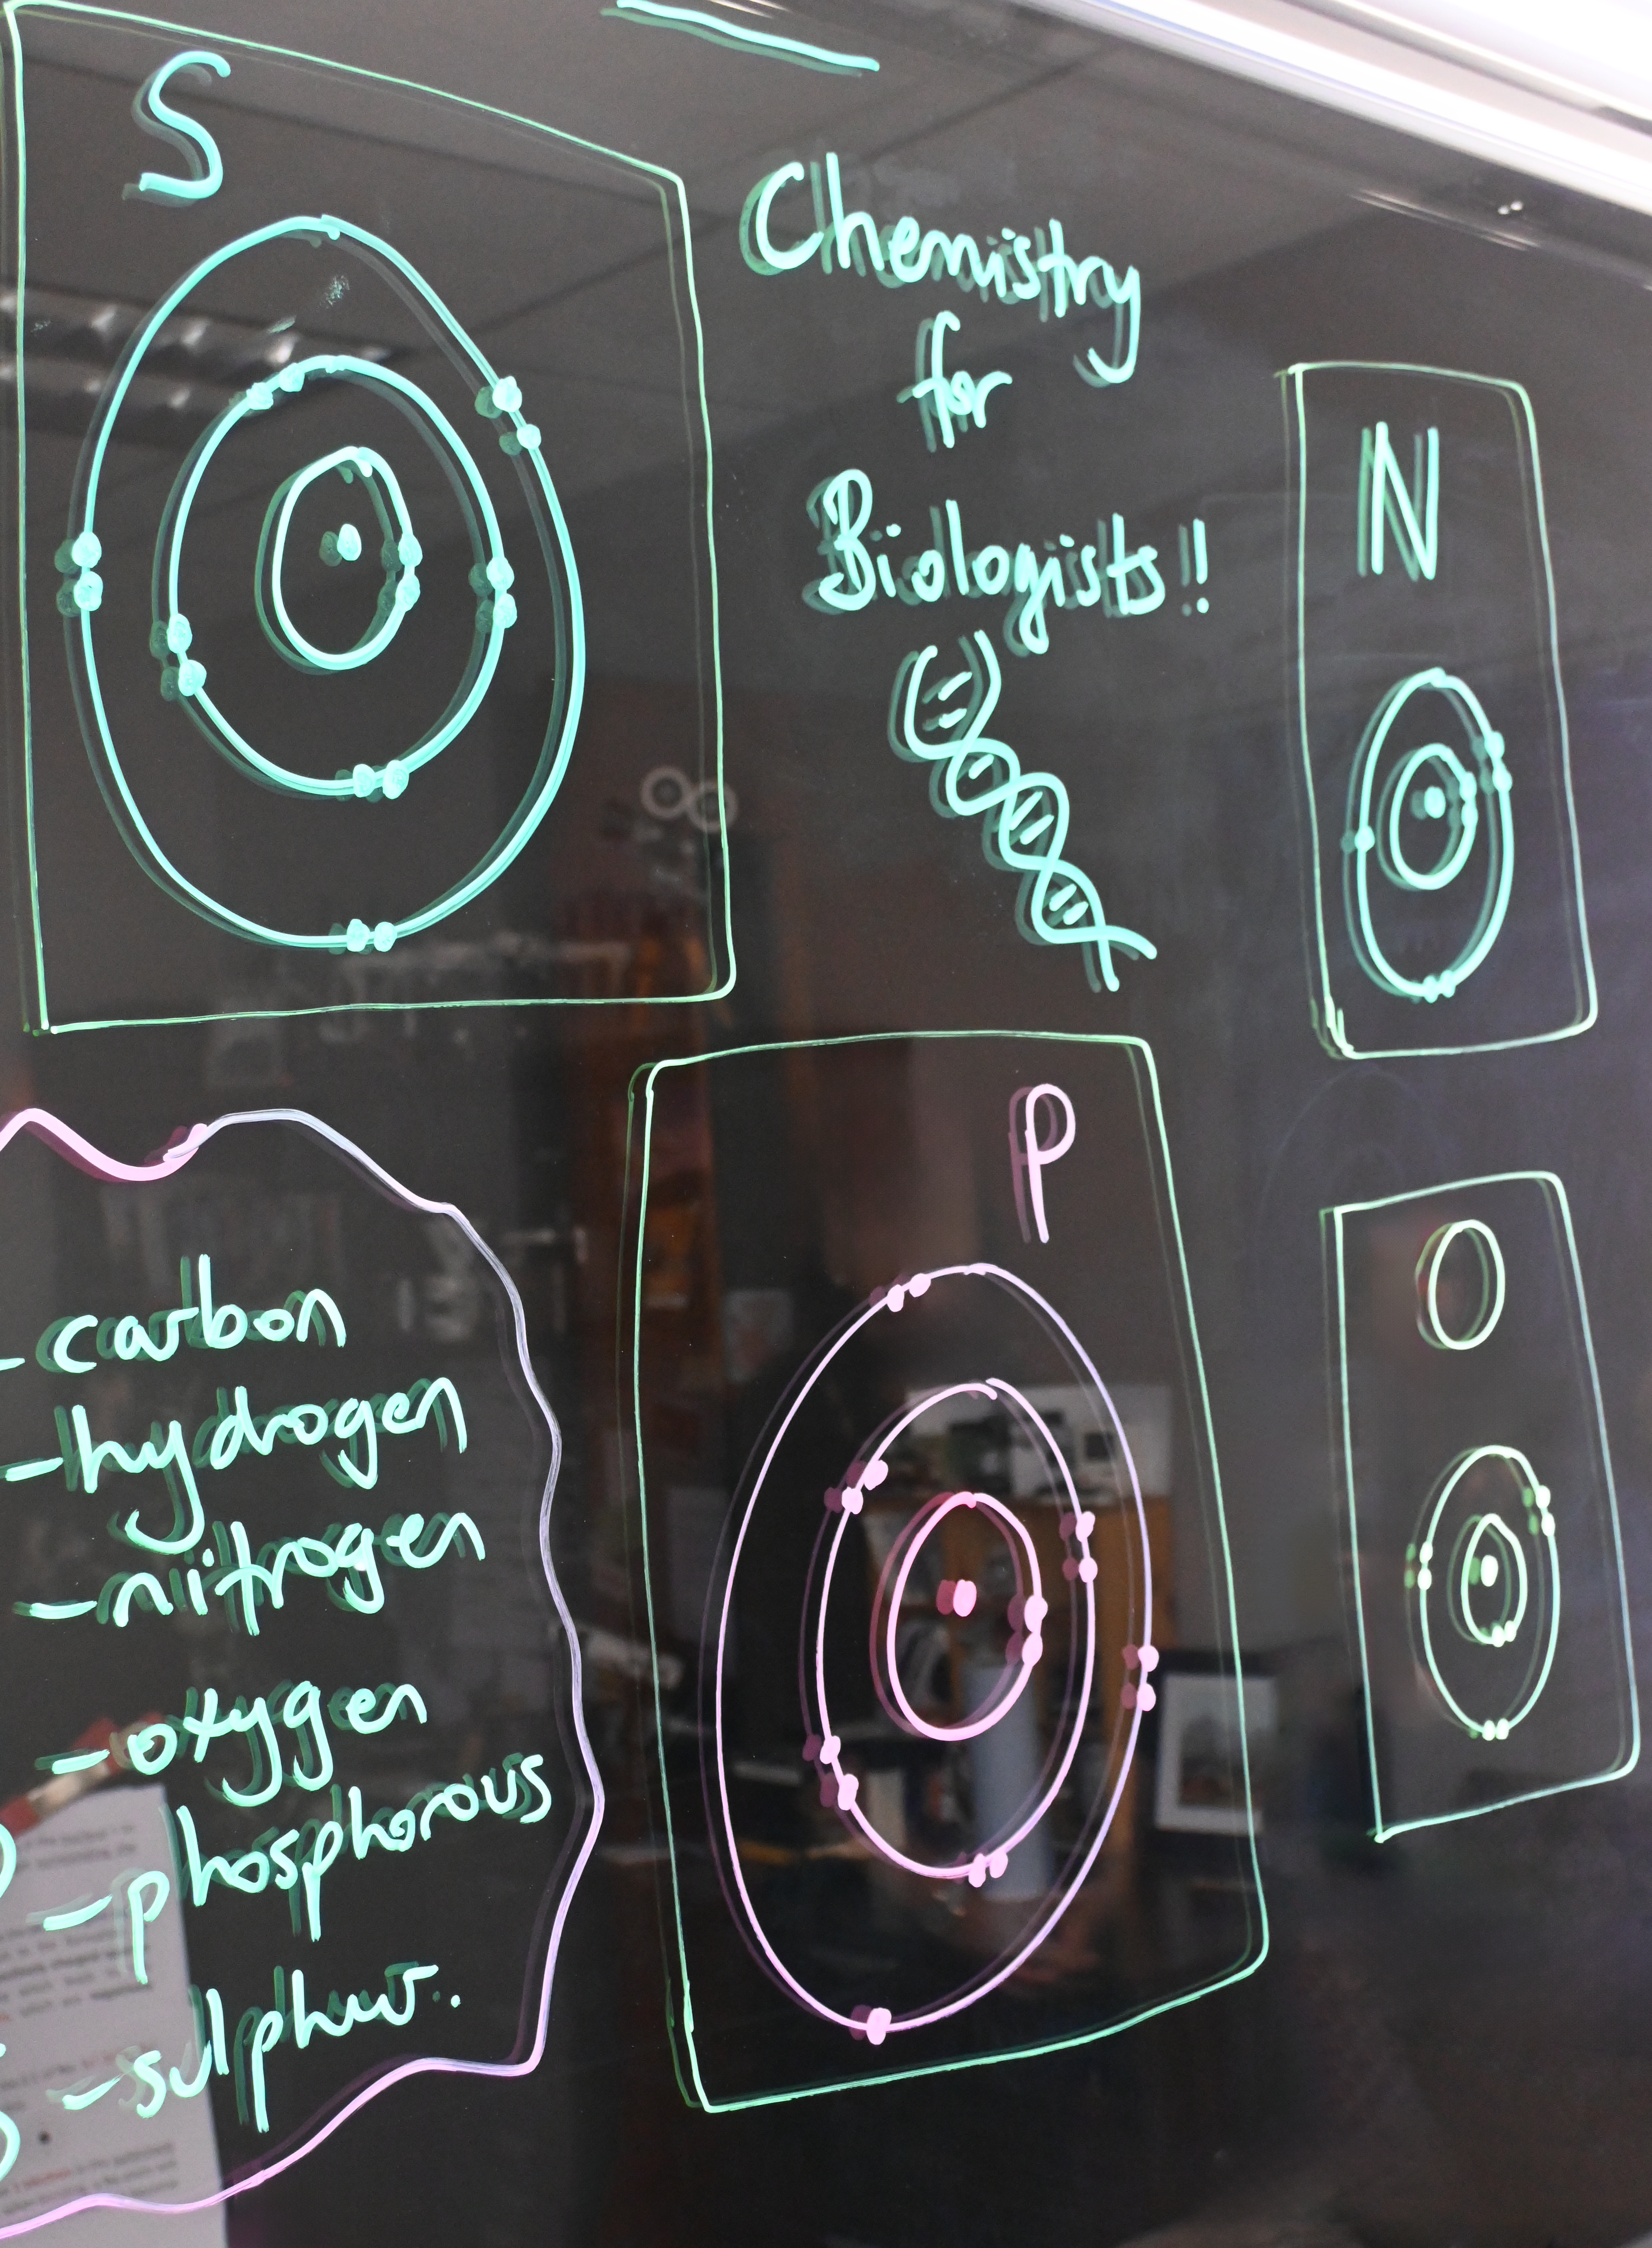 Chemistry content for biologists written on a light board. Drawing of some atoms that make of life are around the light board.